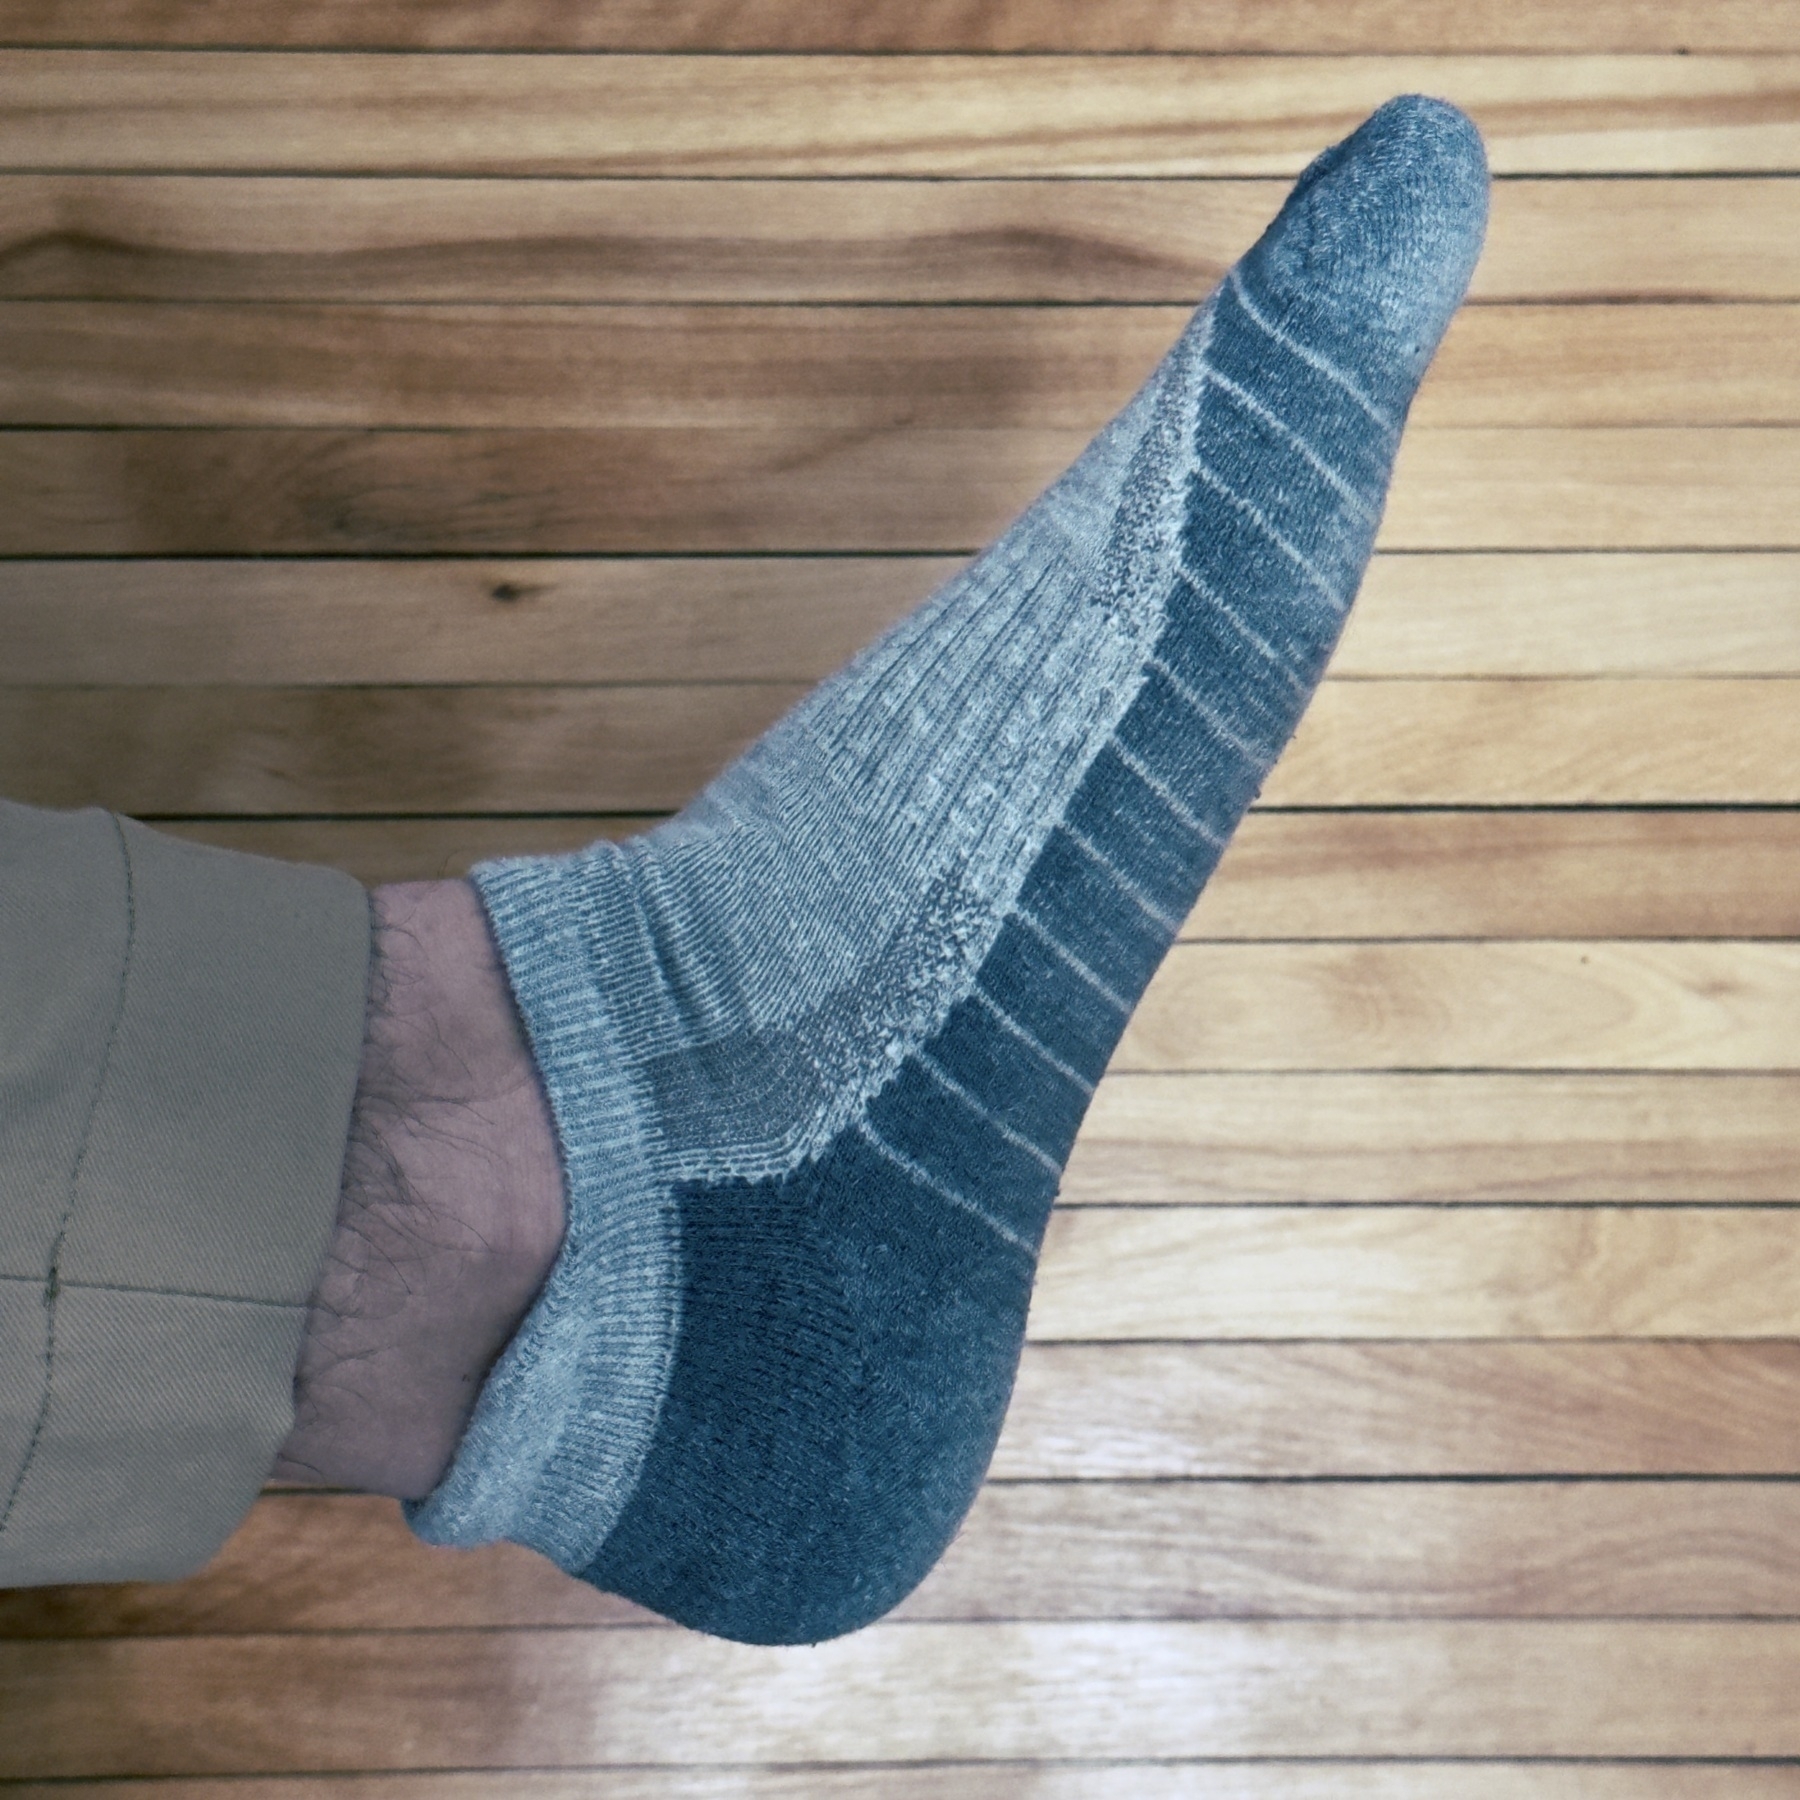 image of a socked foot raised over a natural wood floor